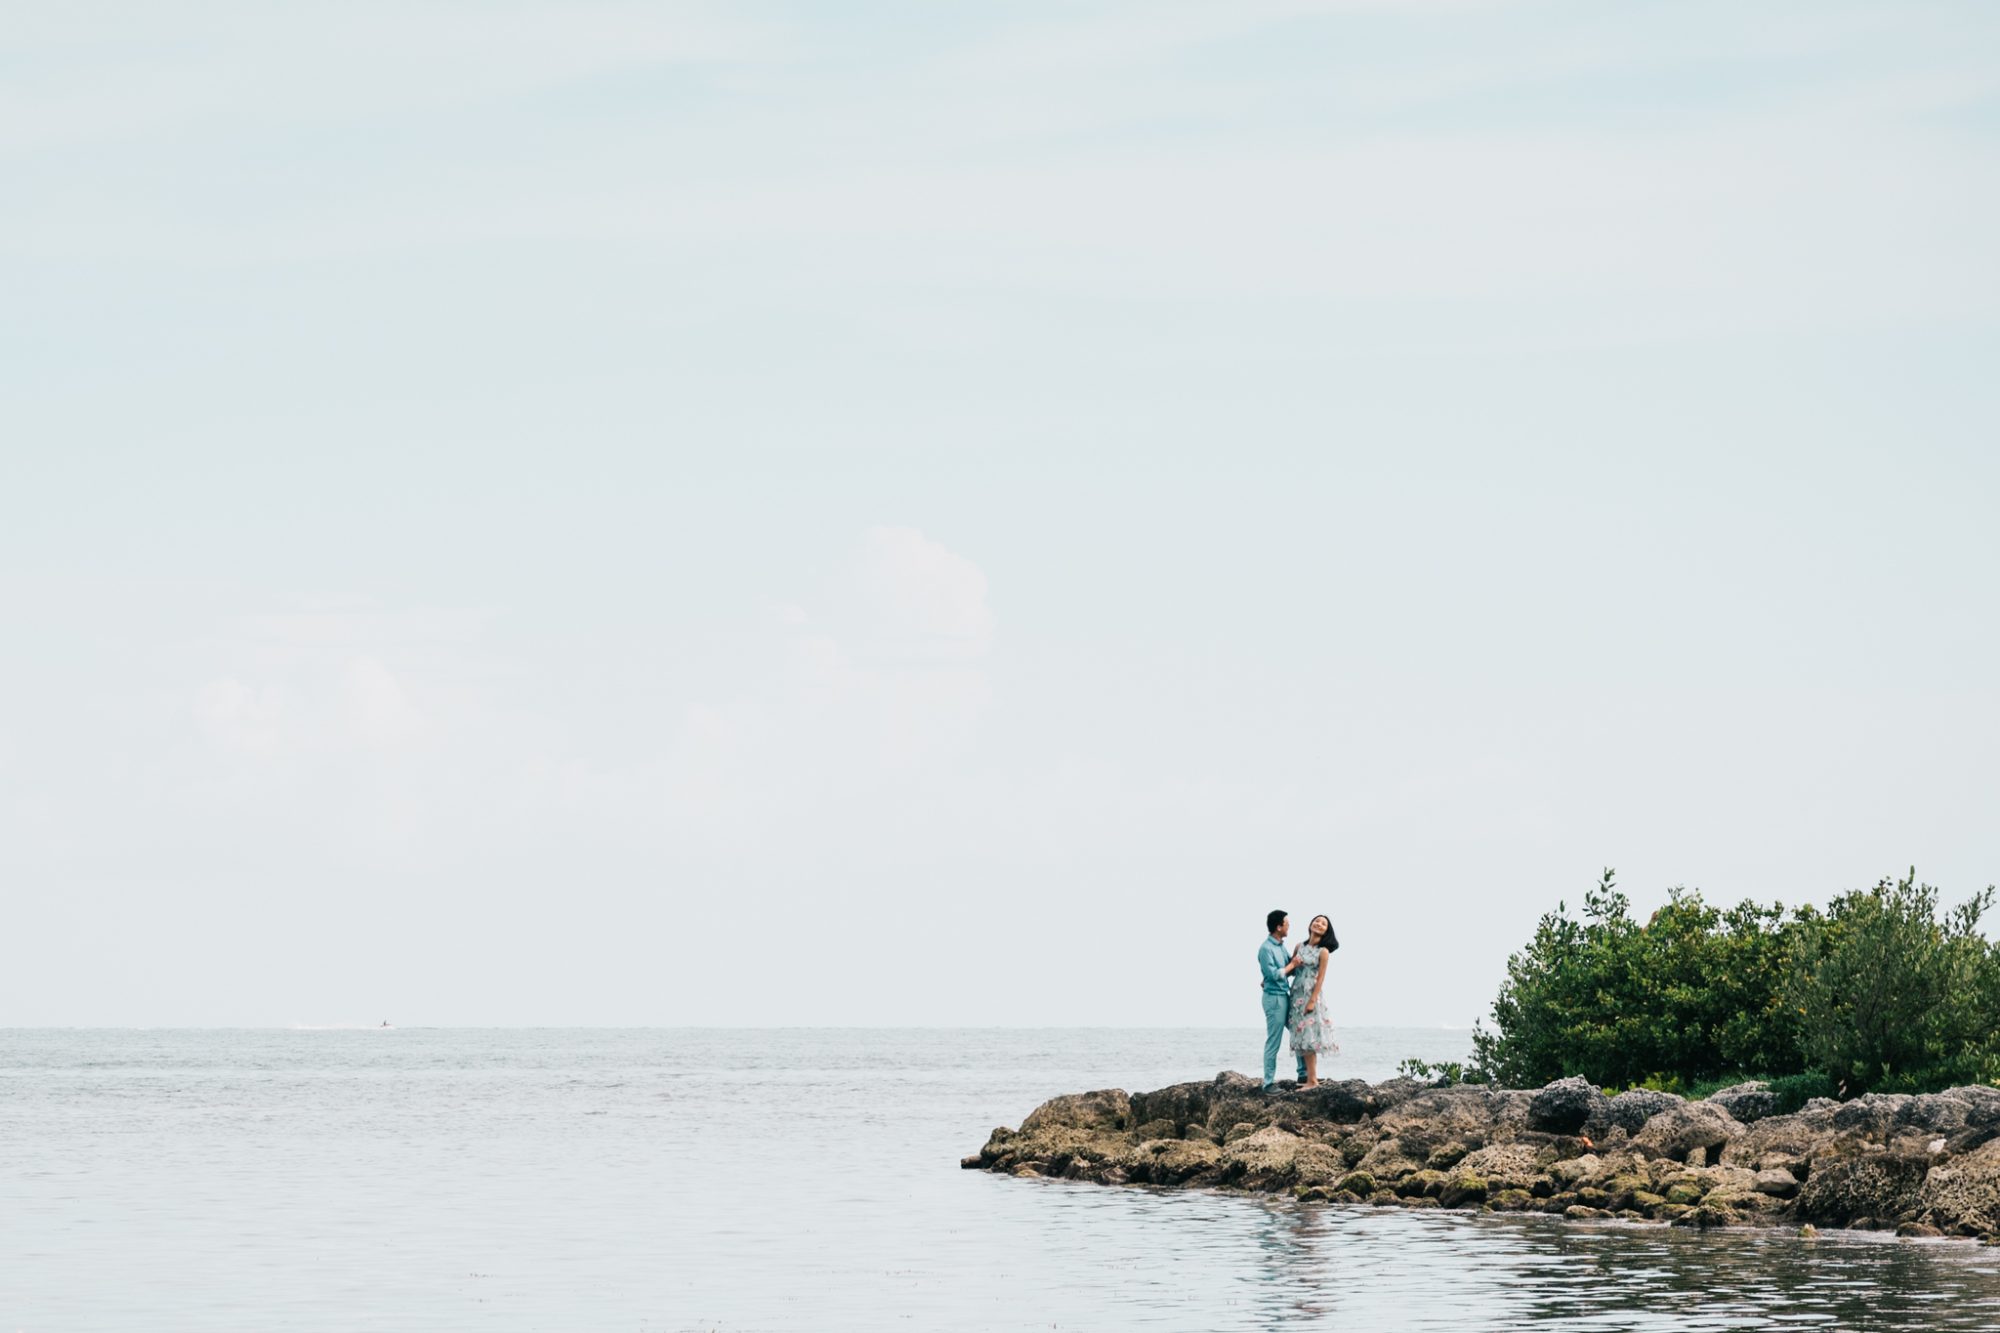 A couple's sunset engagement session in Key West, FL, featuring Xiao and Ying standing on a rock in the water.